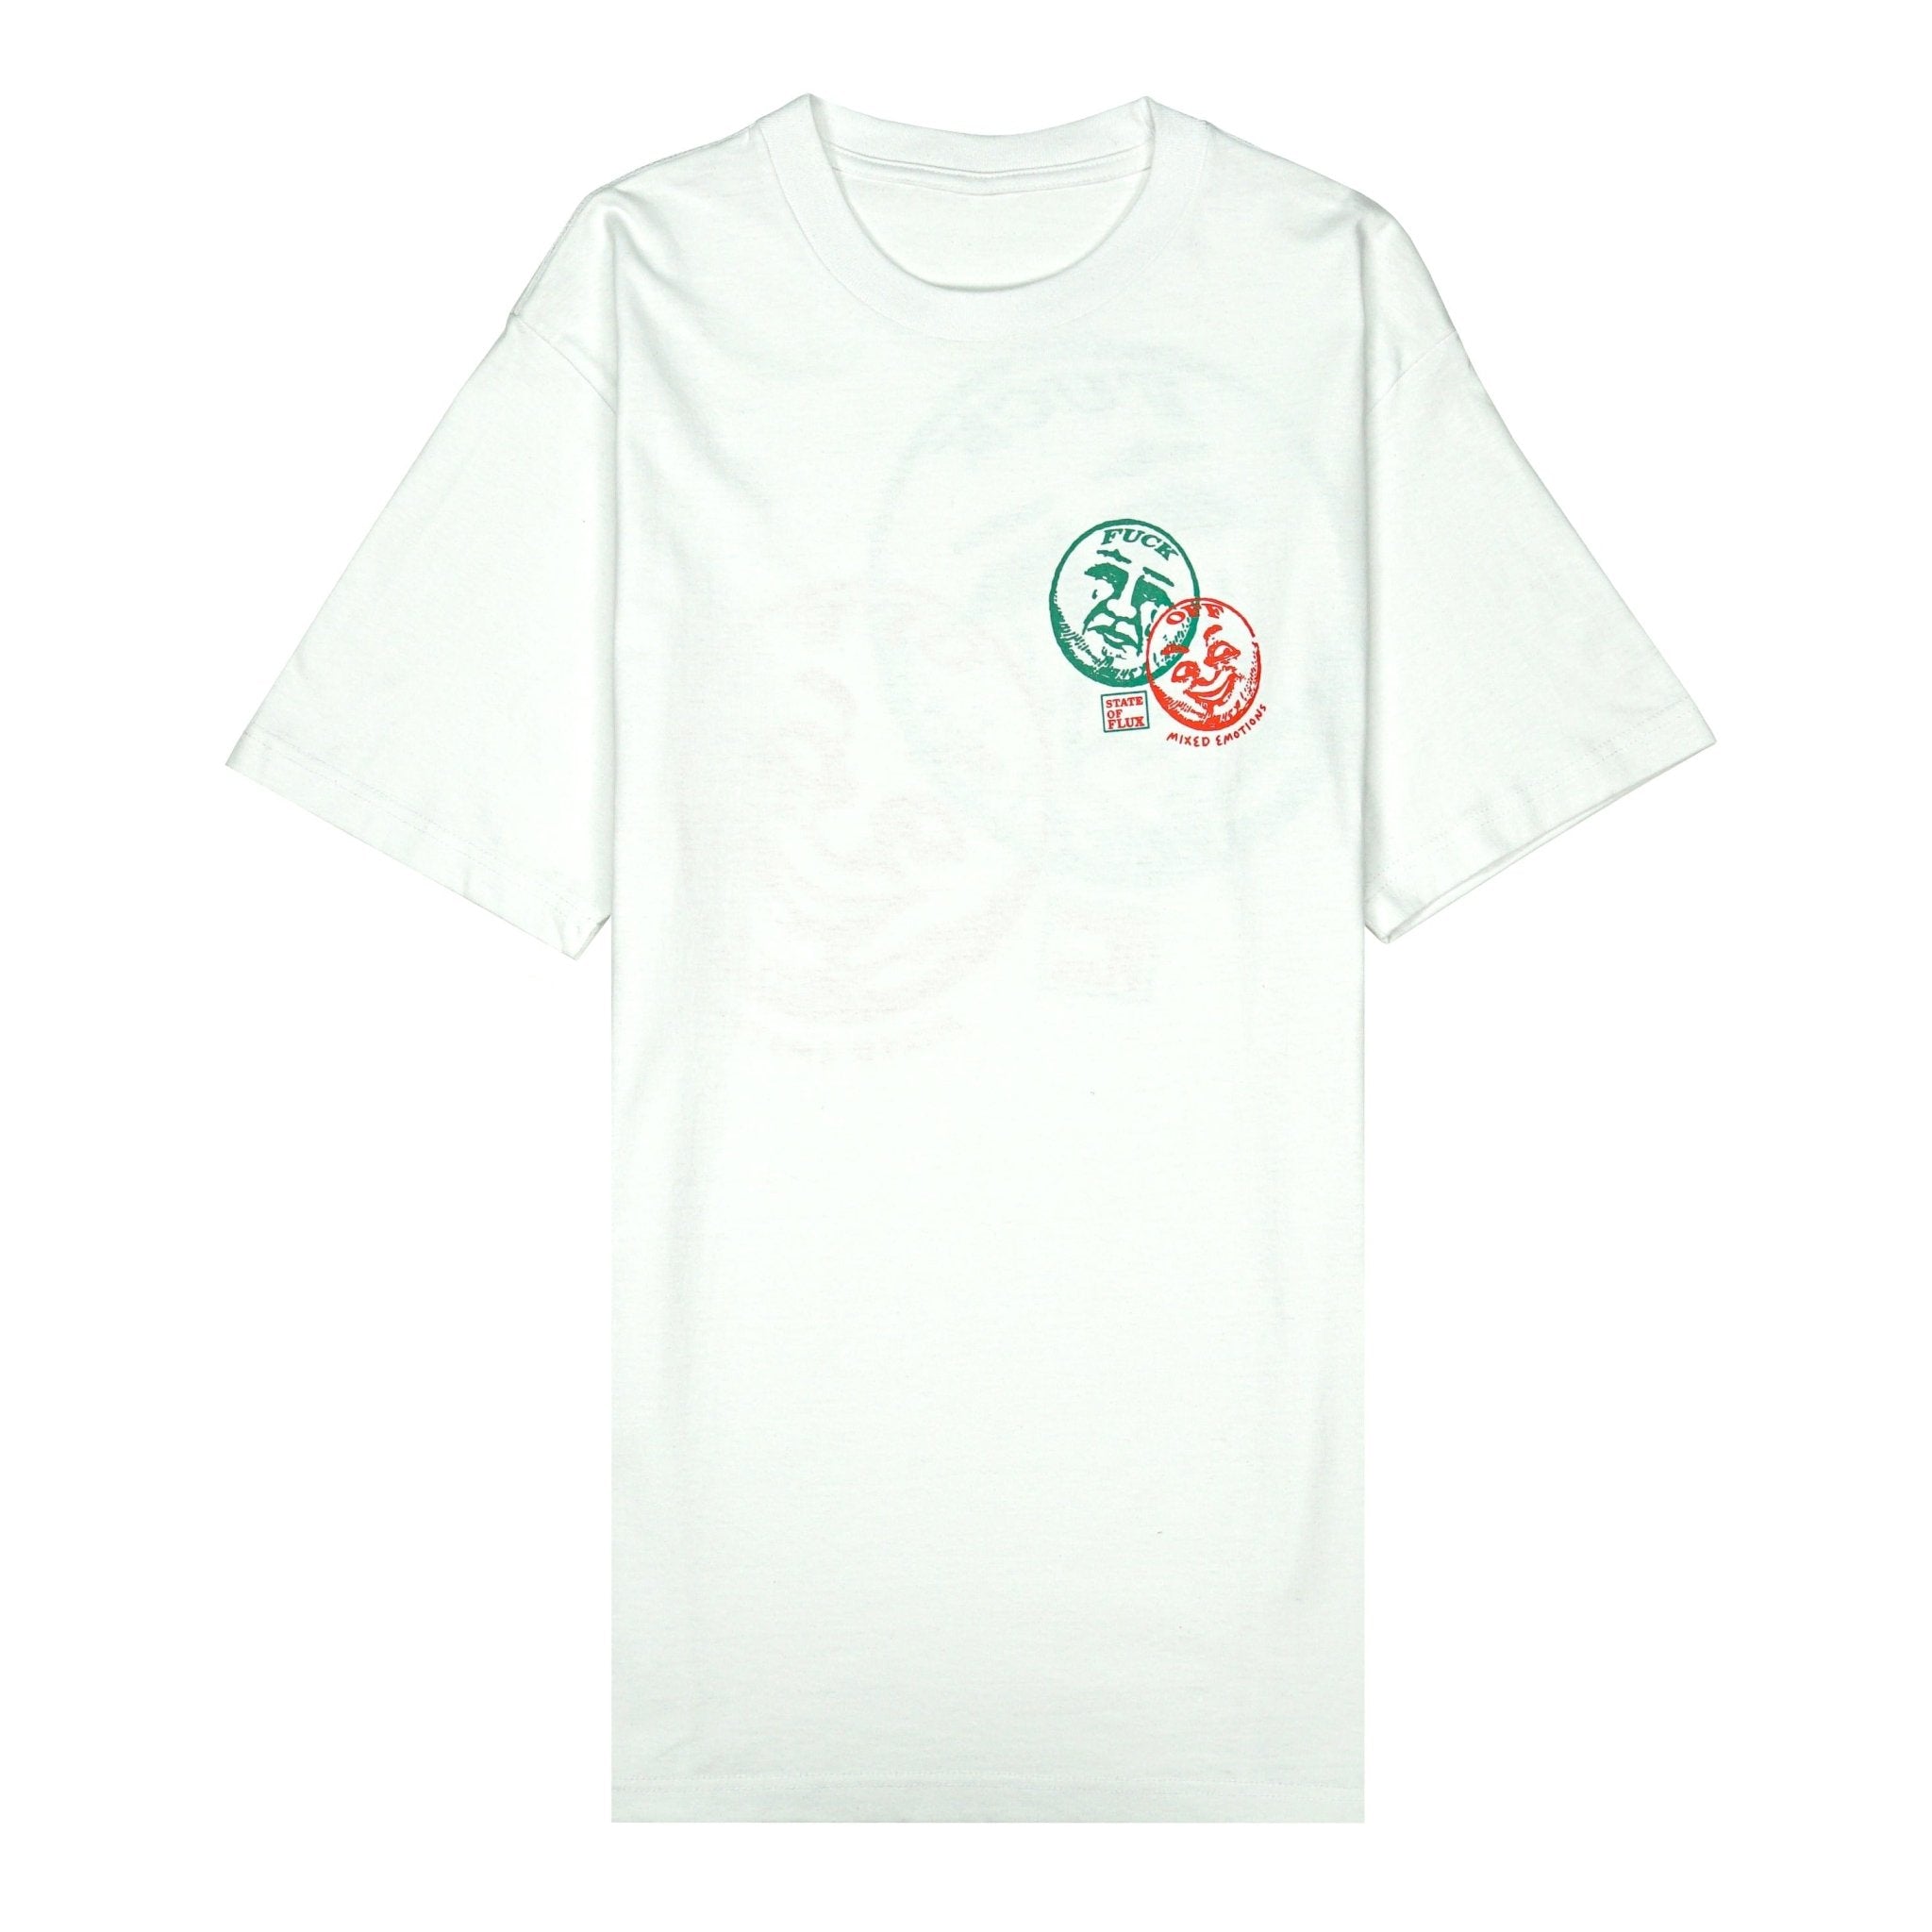 SOF Mixed Emotions Tee in white